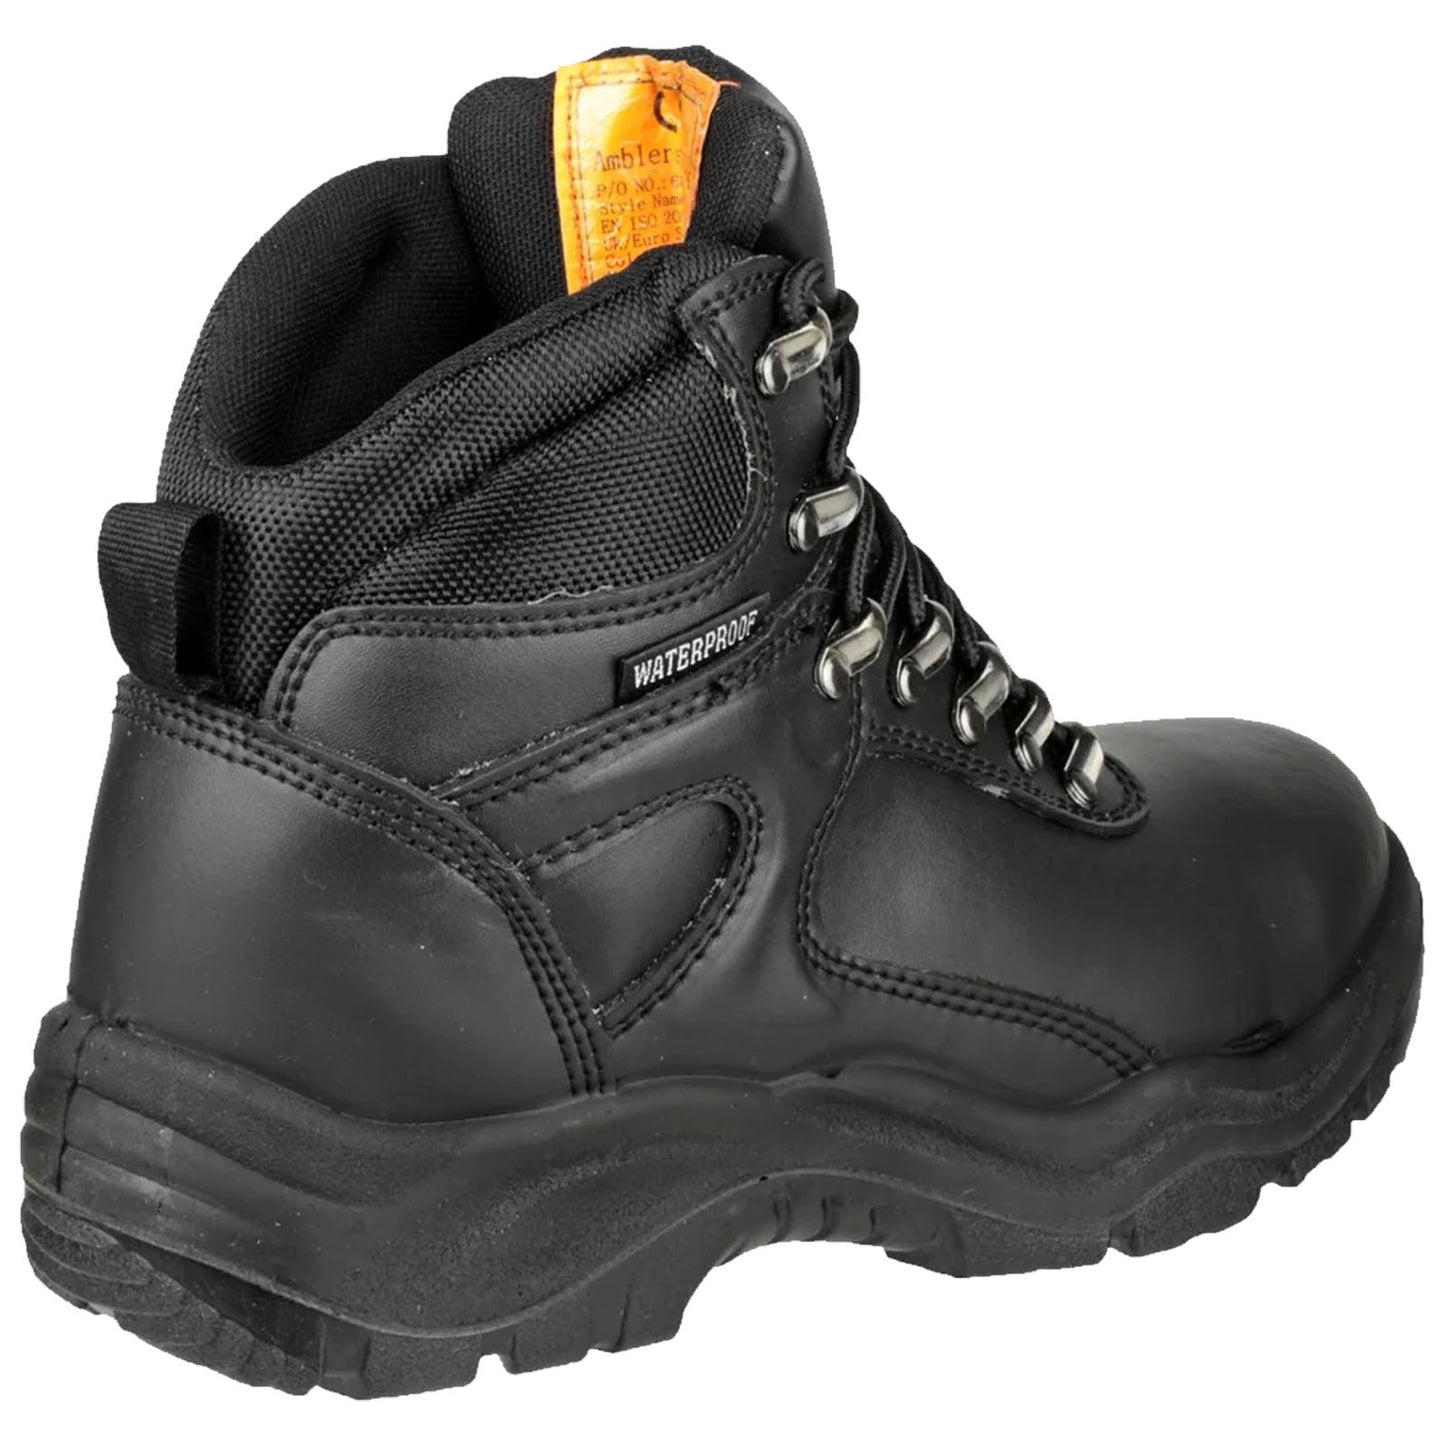 Amblers FS218 S3 Safety Boots